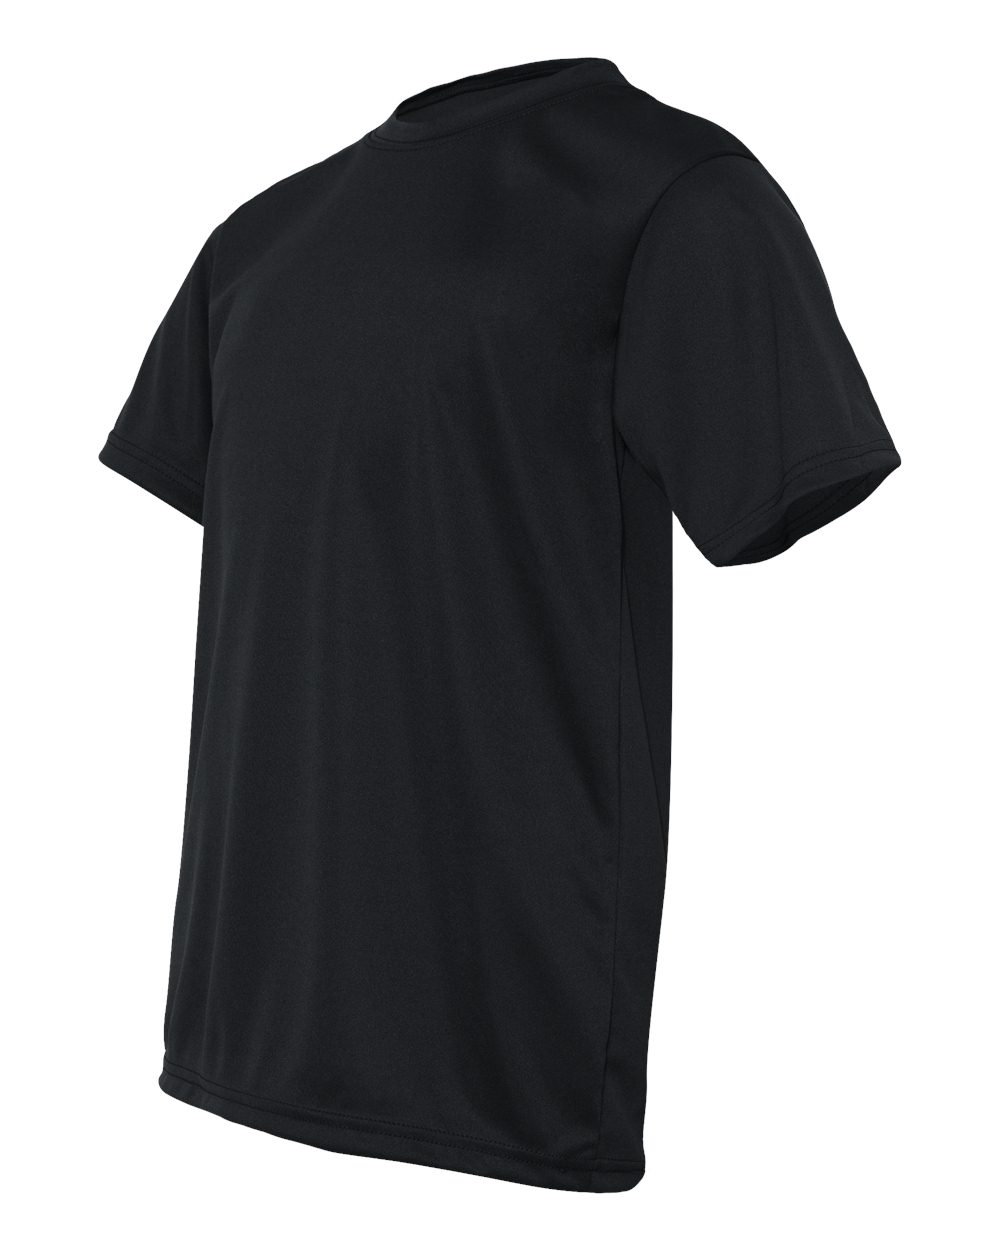 C2 Sport C5200 | 100% Poly Performance Youth S/S tee | ShirtSpace